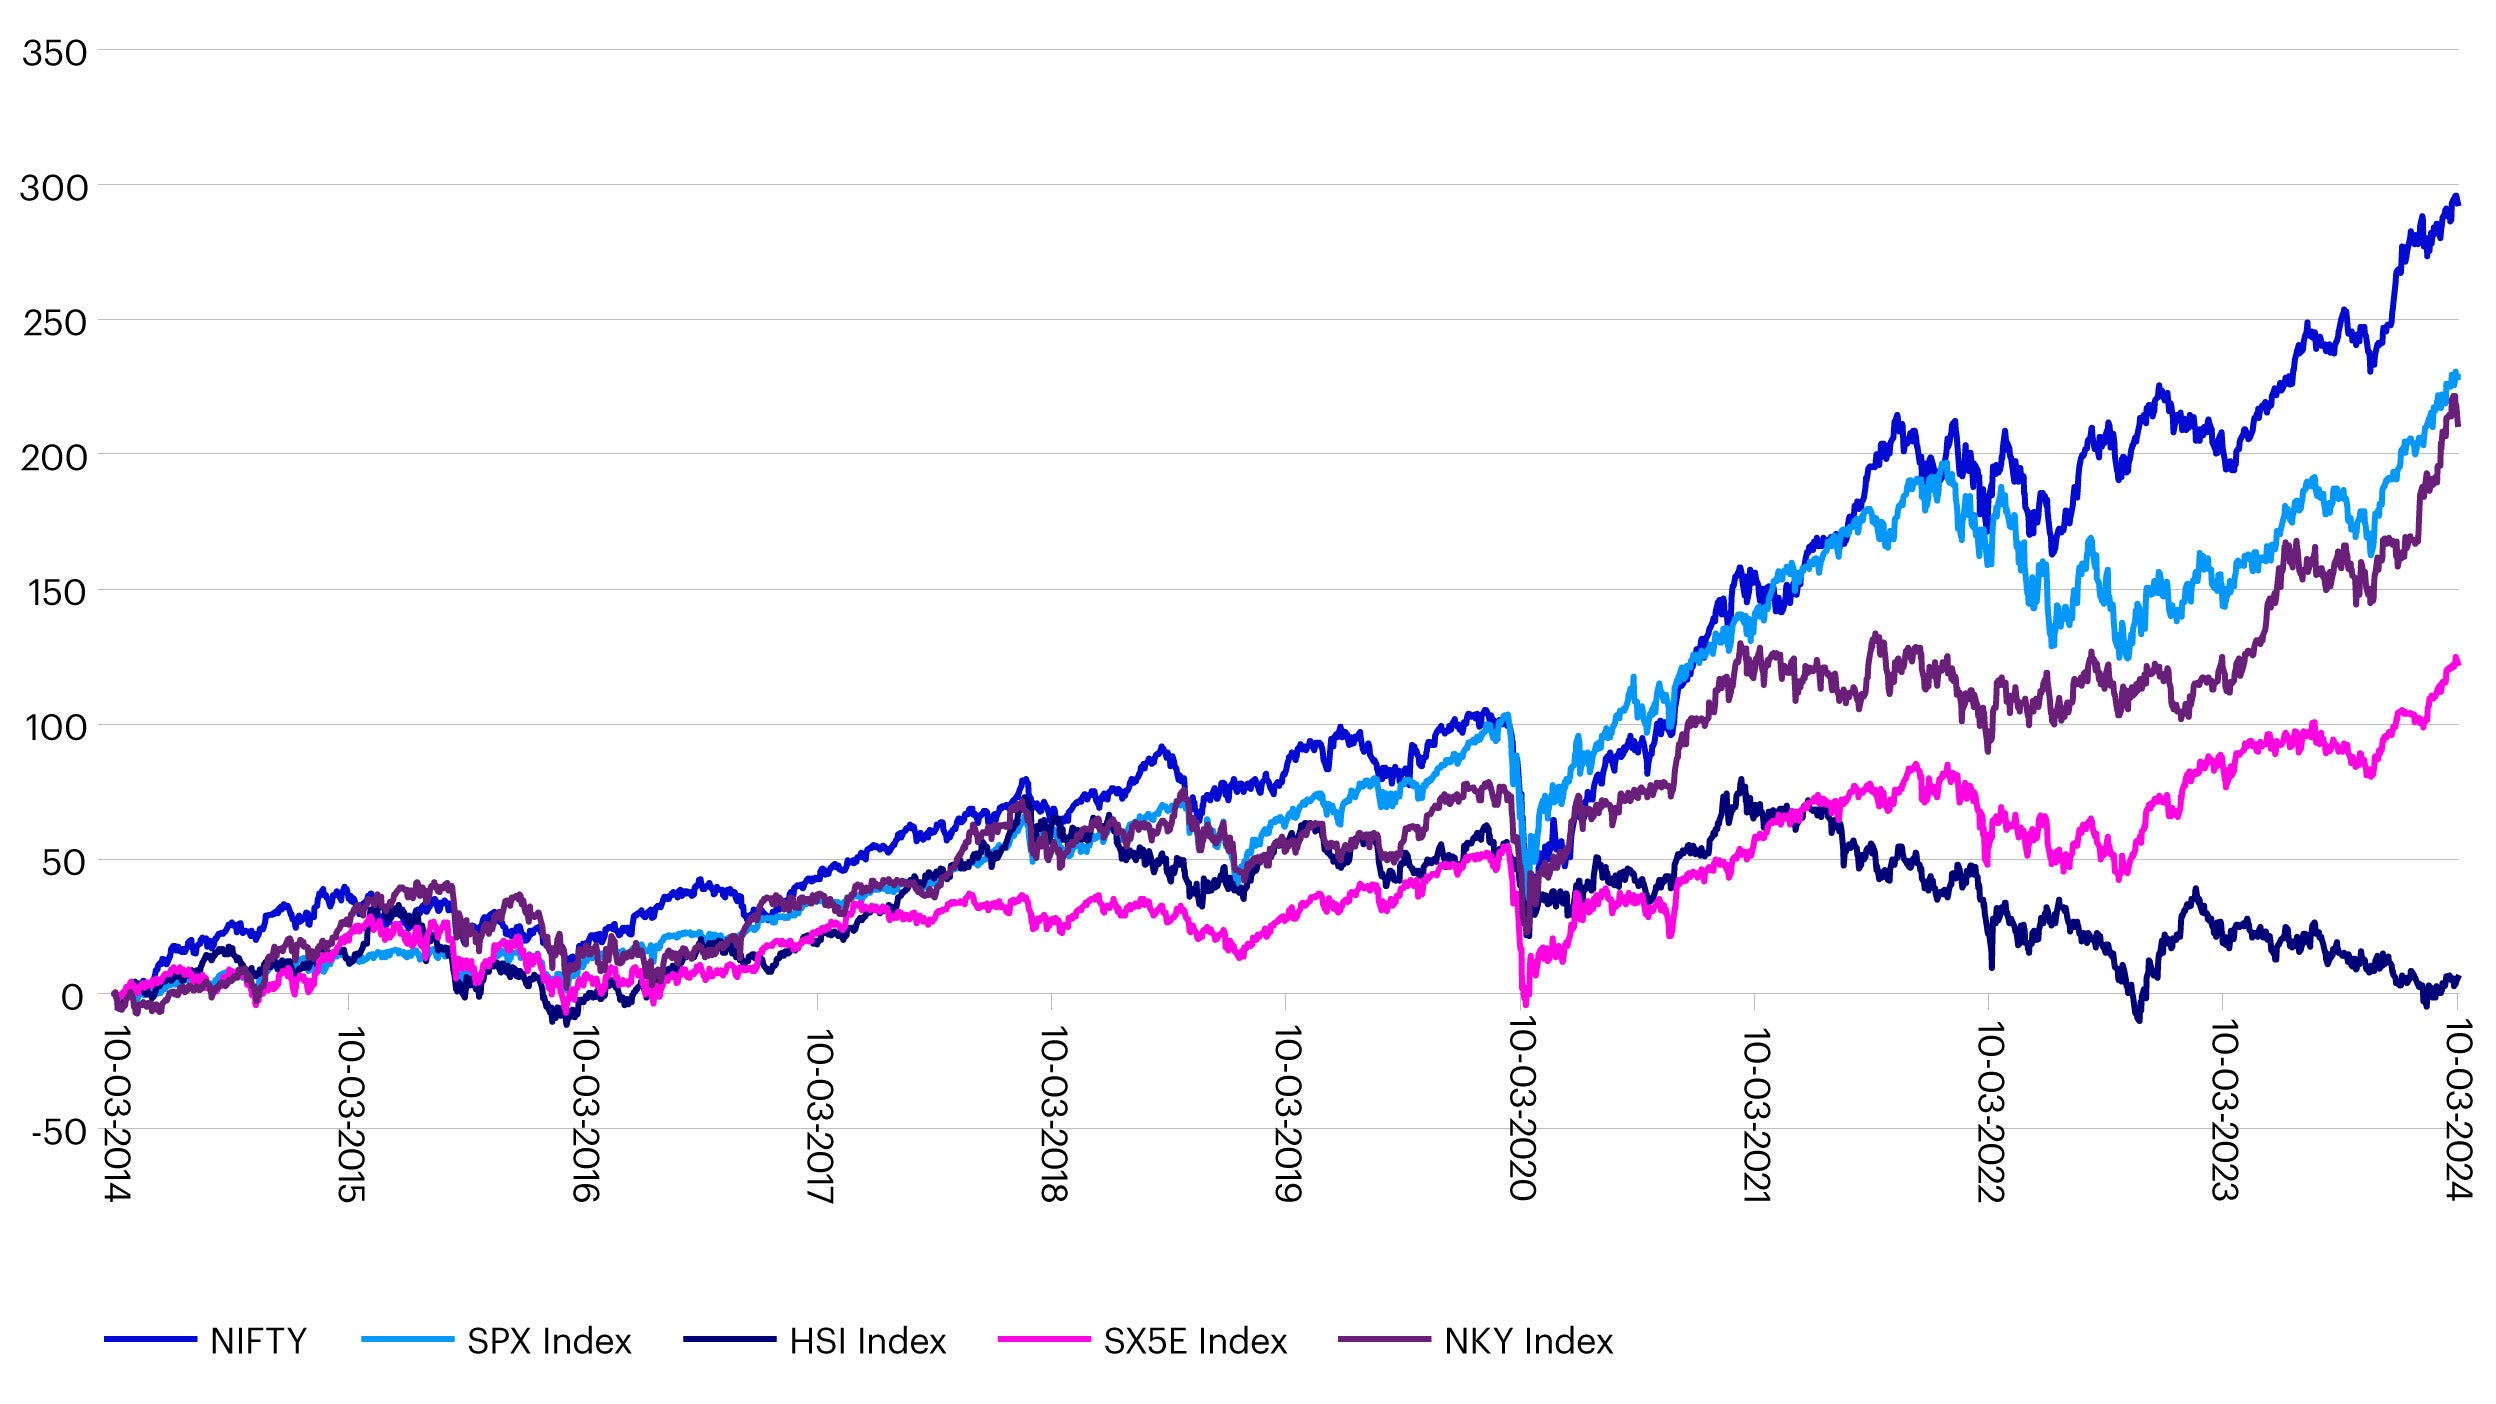 Figure 7 - NIFTY 50 Index performance relative to major market indices (10-year basis)